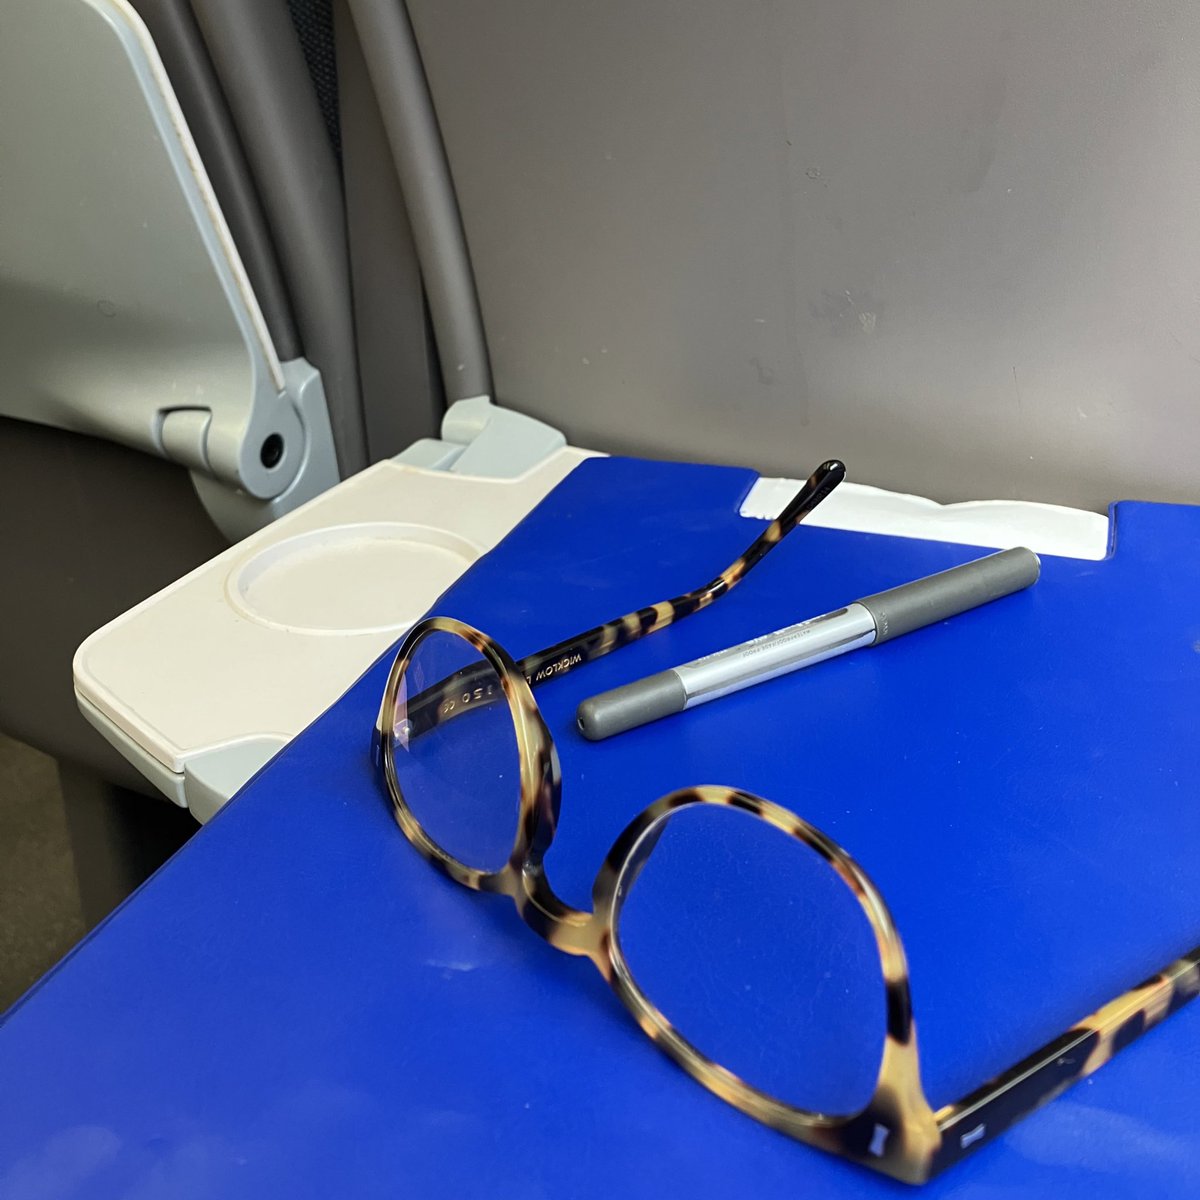 Another train - bits are in sharp focus due to new glasses. Taking a while to get used to this reality!